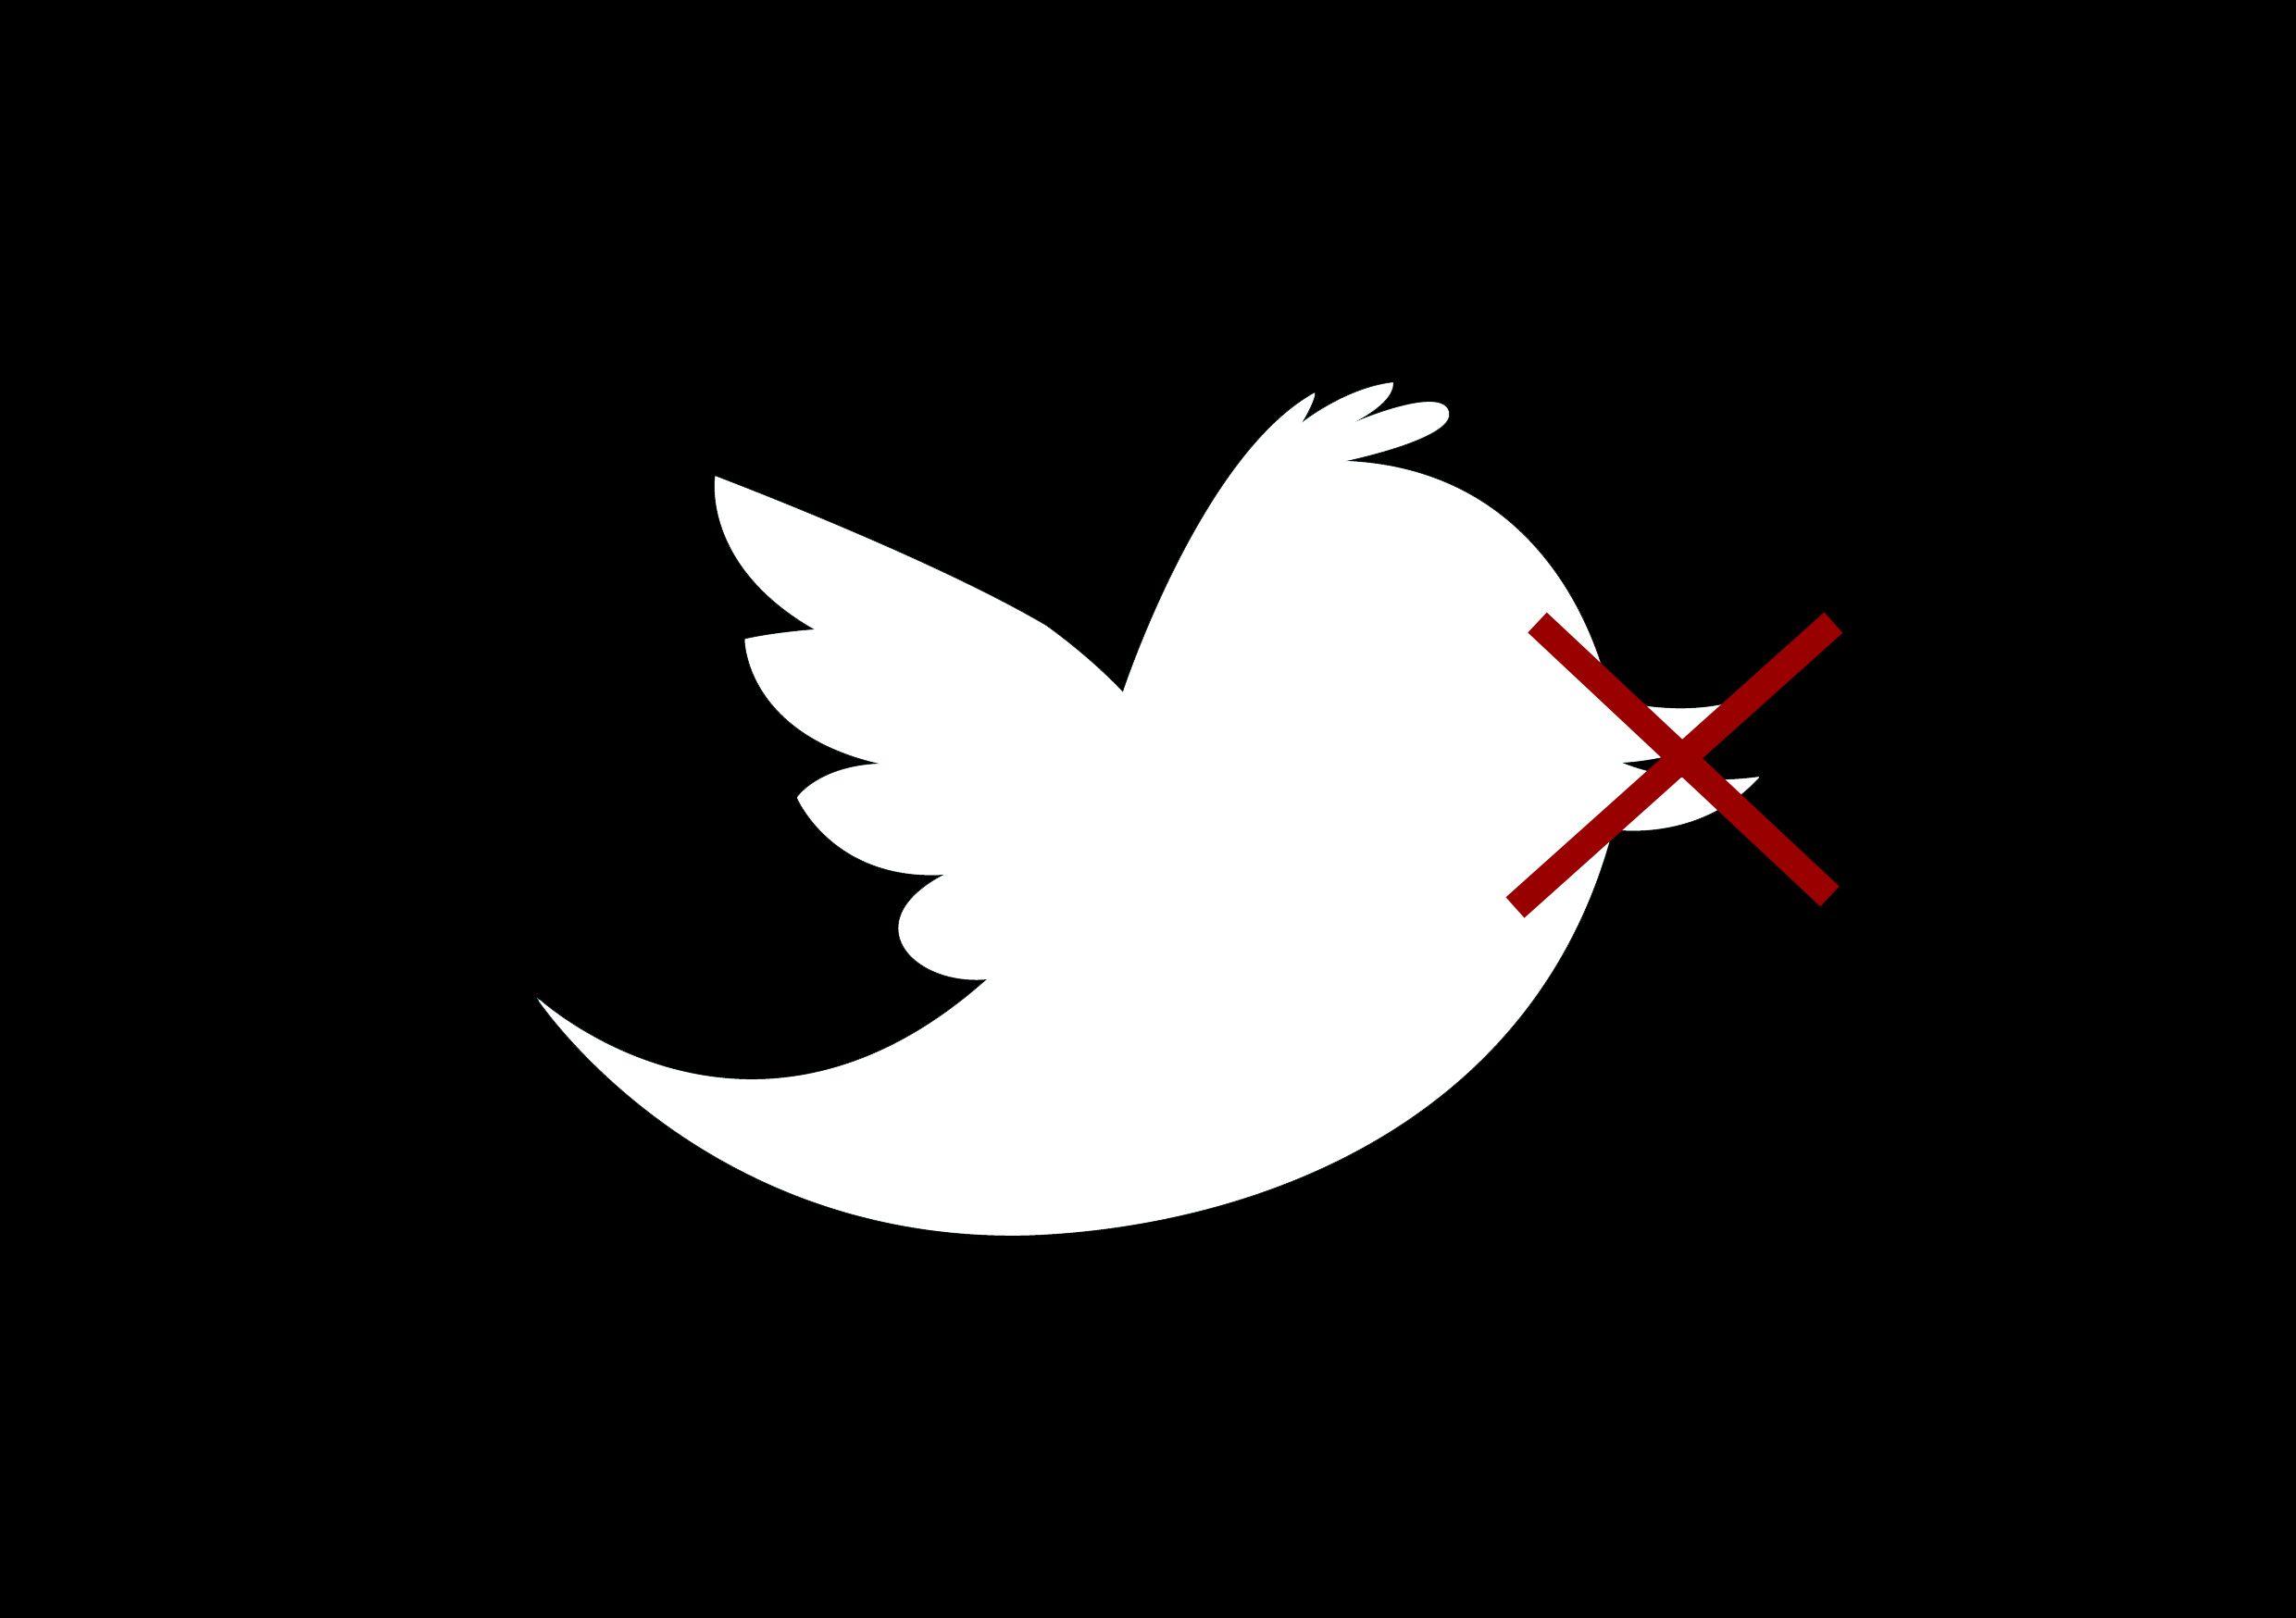 Twitter is becoming an unpredictable censorship machine and is out of control. (Photo internet reproduction)